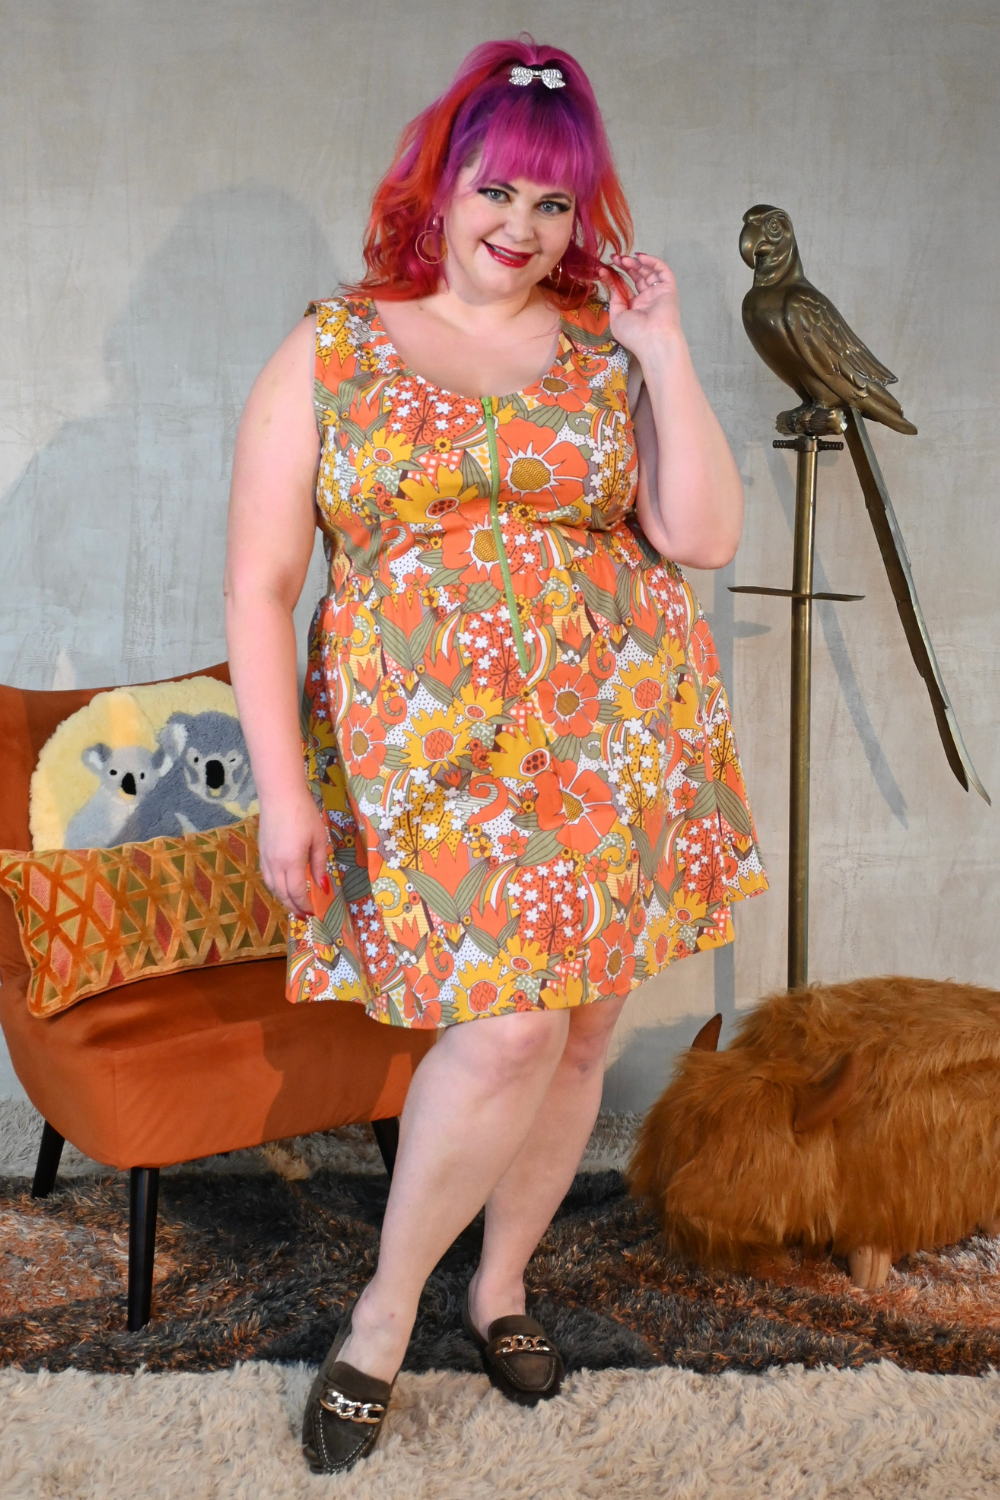 Pink haired curvy model wearing bold floral print knee-length dress, loafers in a living room